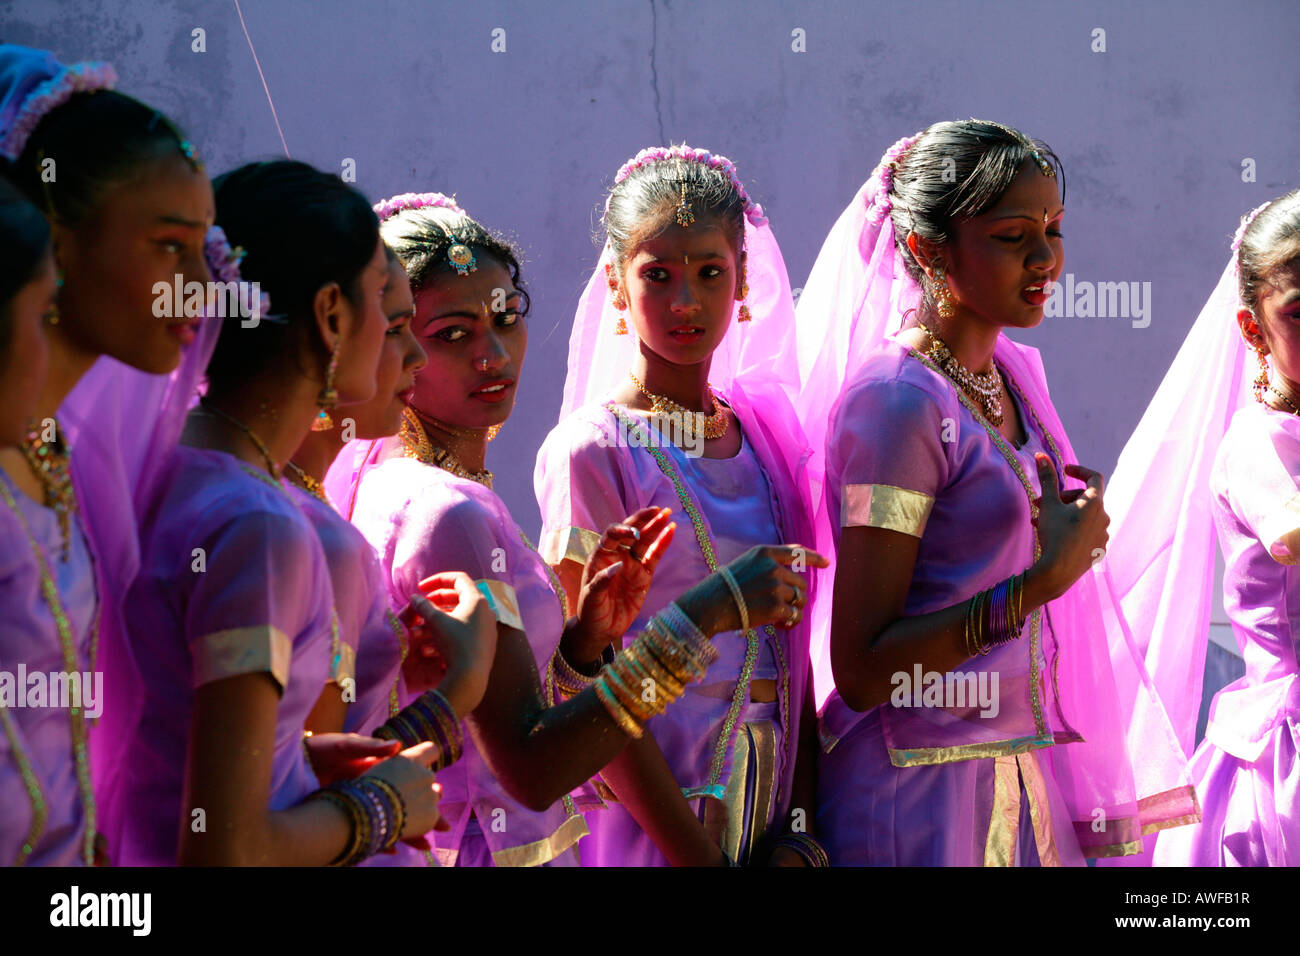 Girls of Indian ethnicity at a Hindu Festival in Georgetown, Guyana, South America Stock Photo